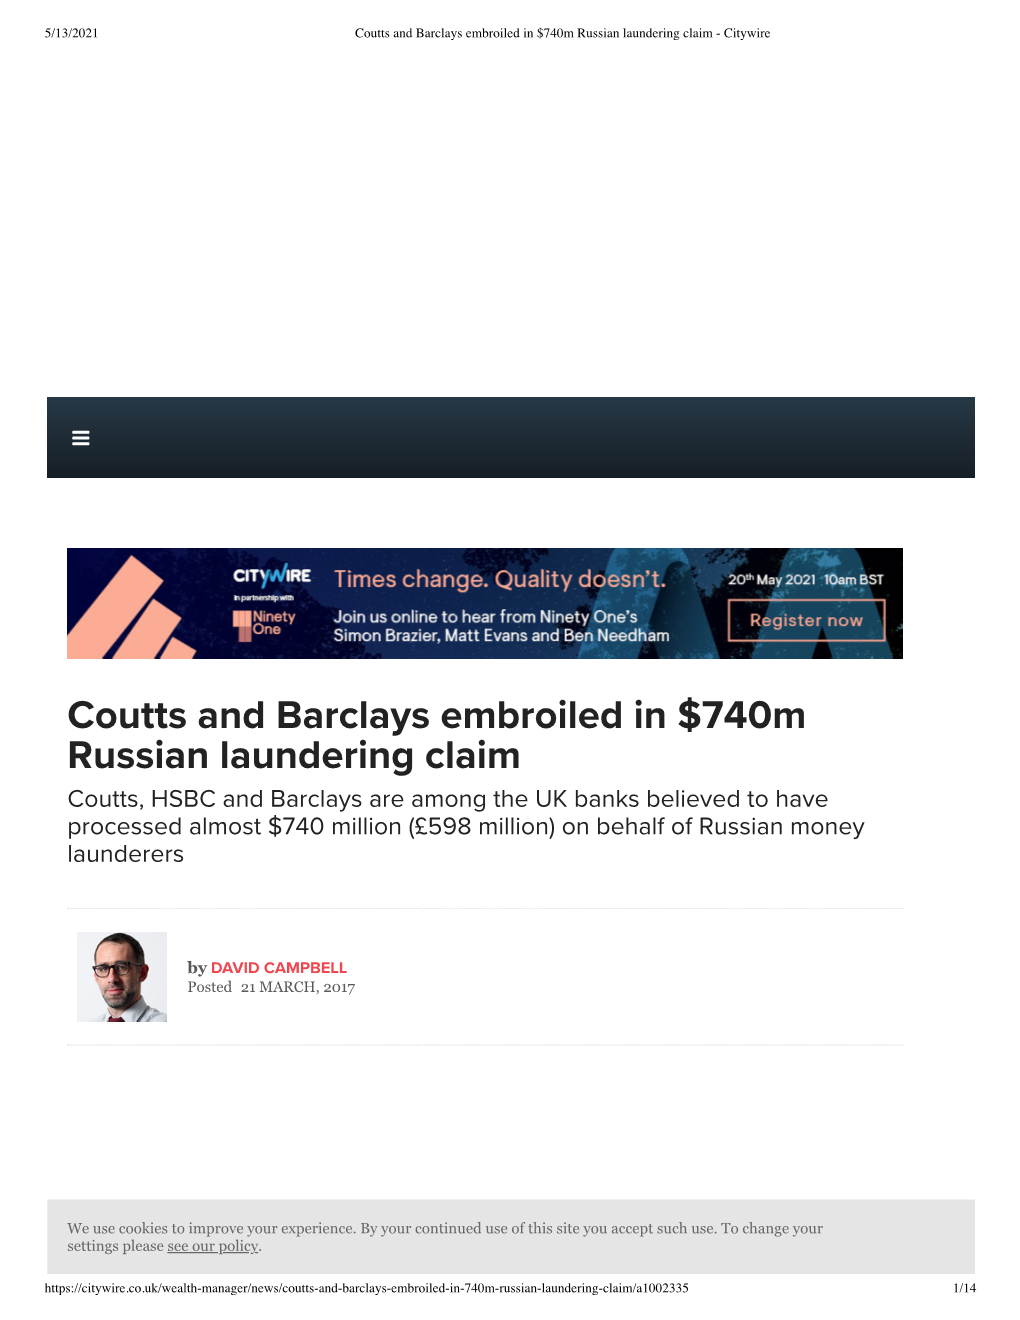 Coutts and Barclays Embroiled in $740M Russian Laundering Claim - Citywire